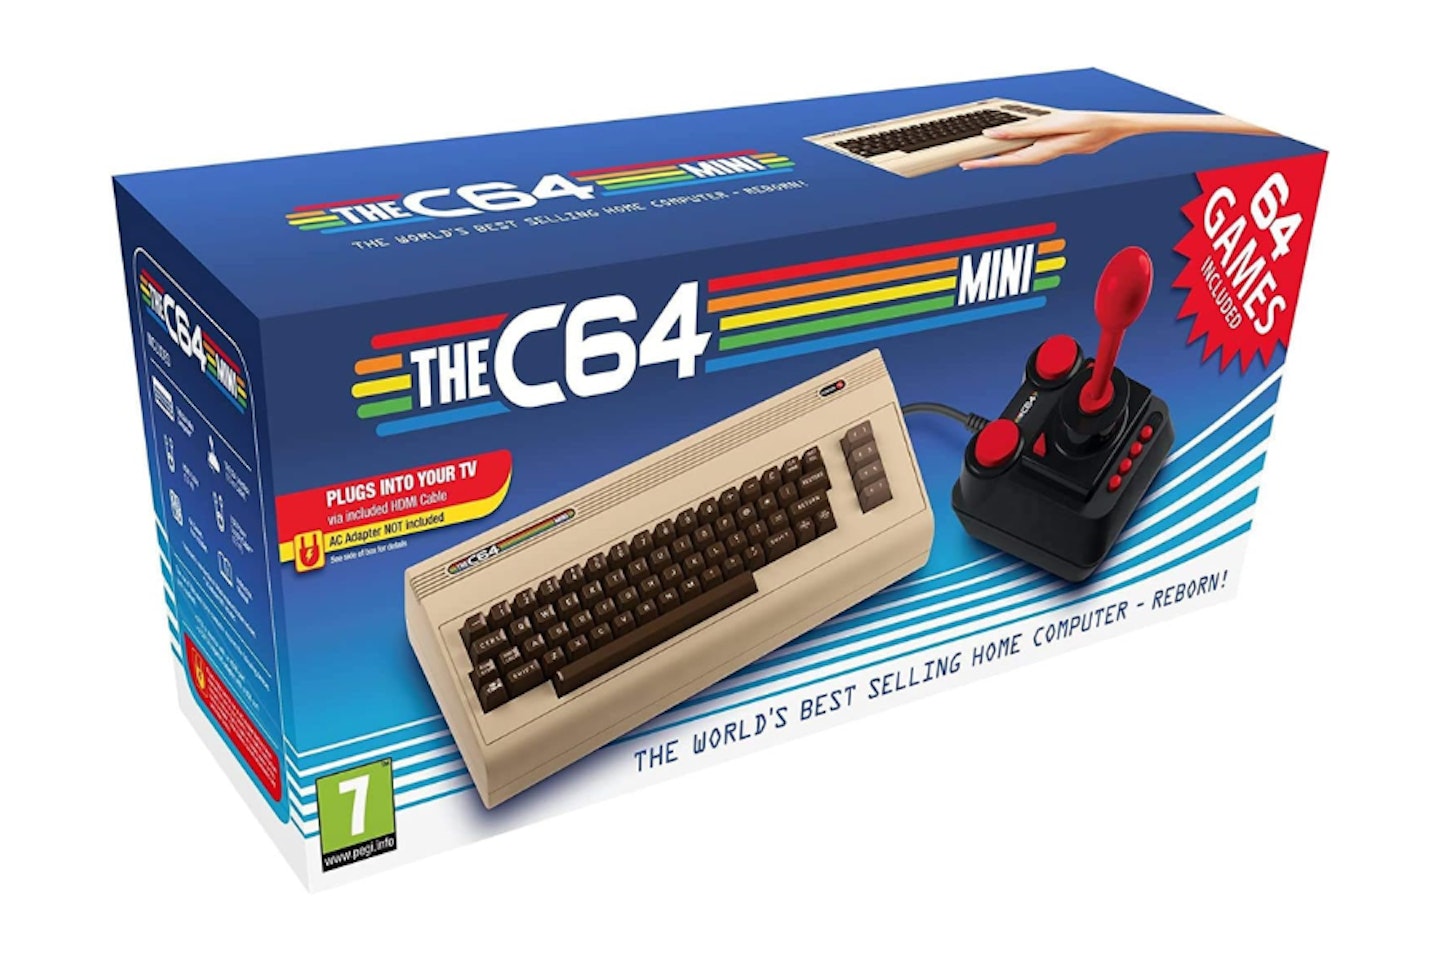 The C64 Mini - an example of the best retro game console